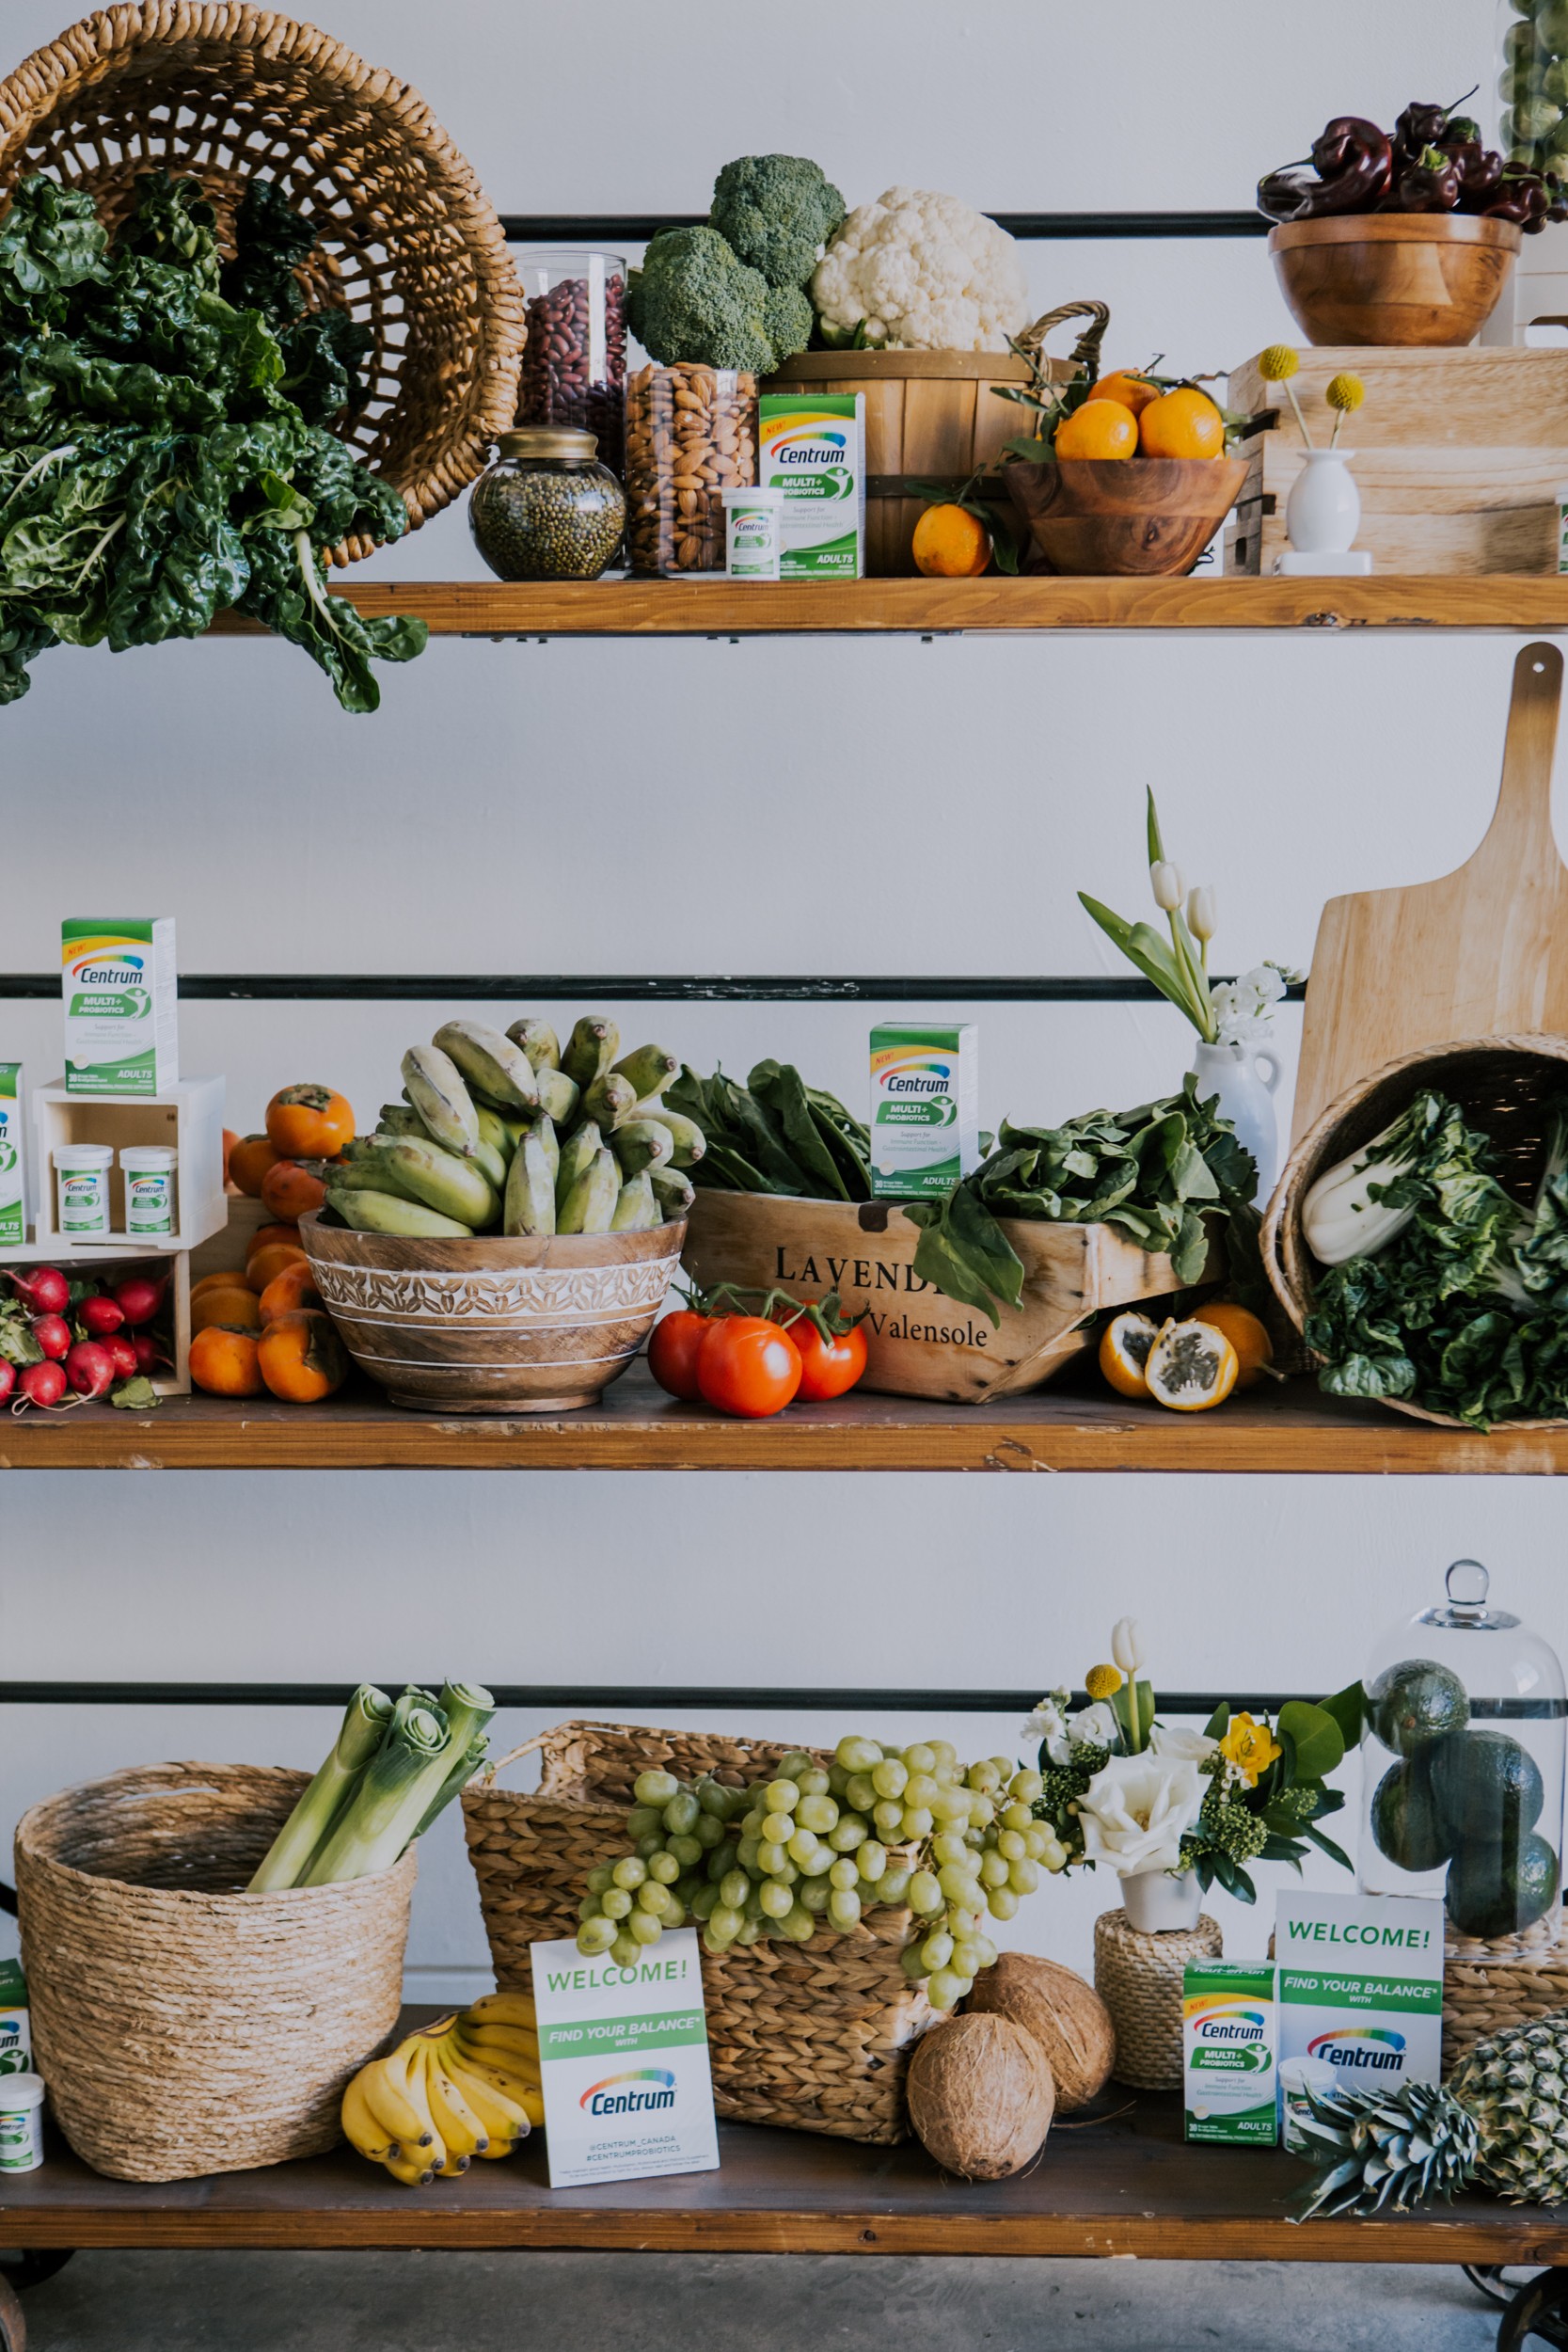 3 wooden shelves are filled with healthy greens, fruits, veggies, and nuts to help promote the new multi probiotic vitamin